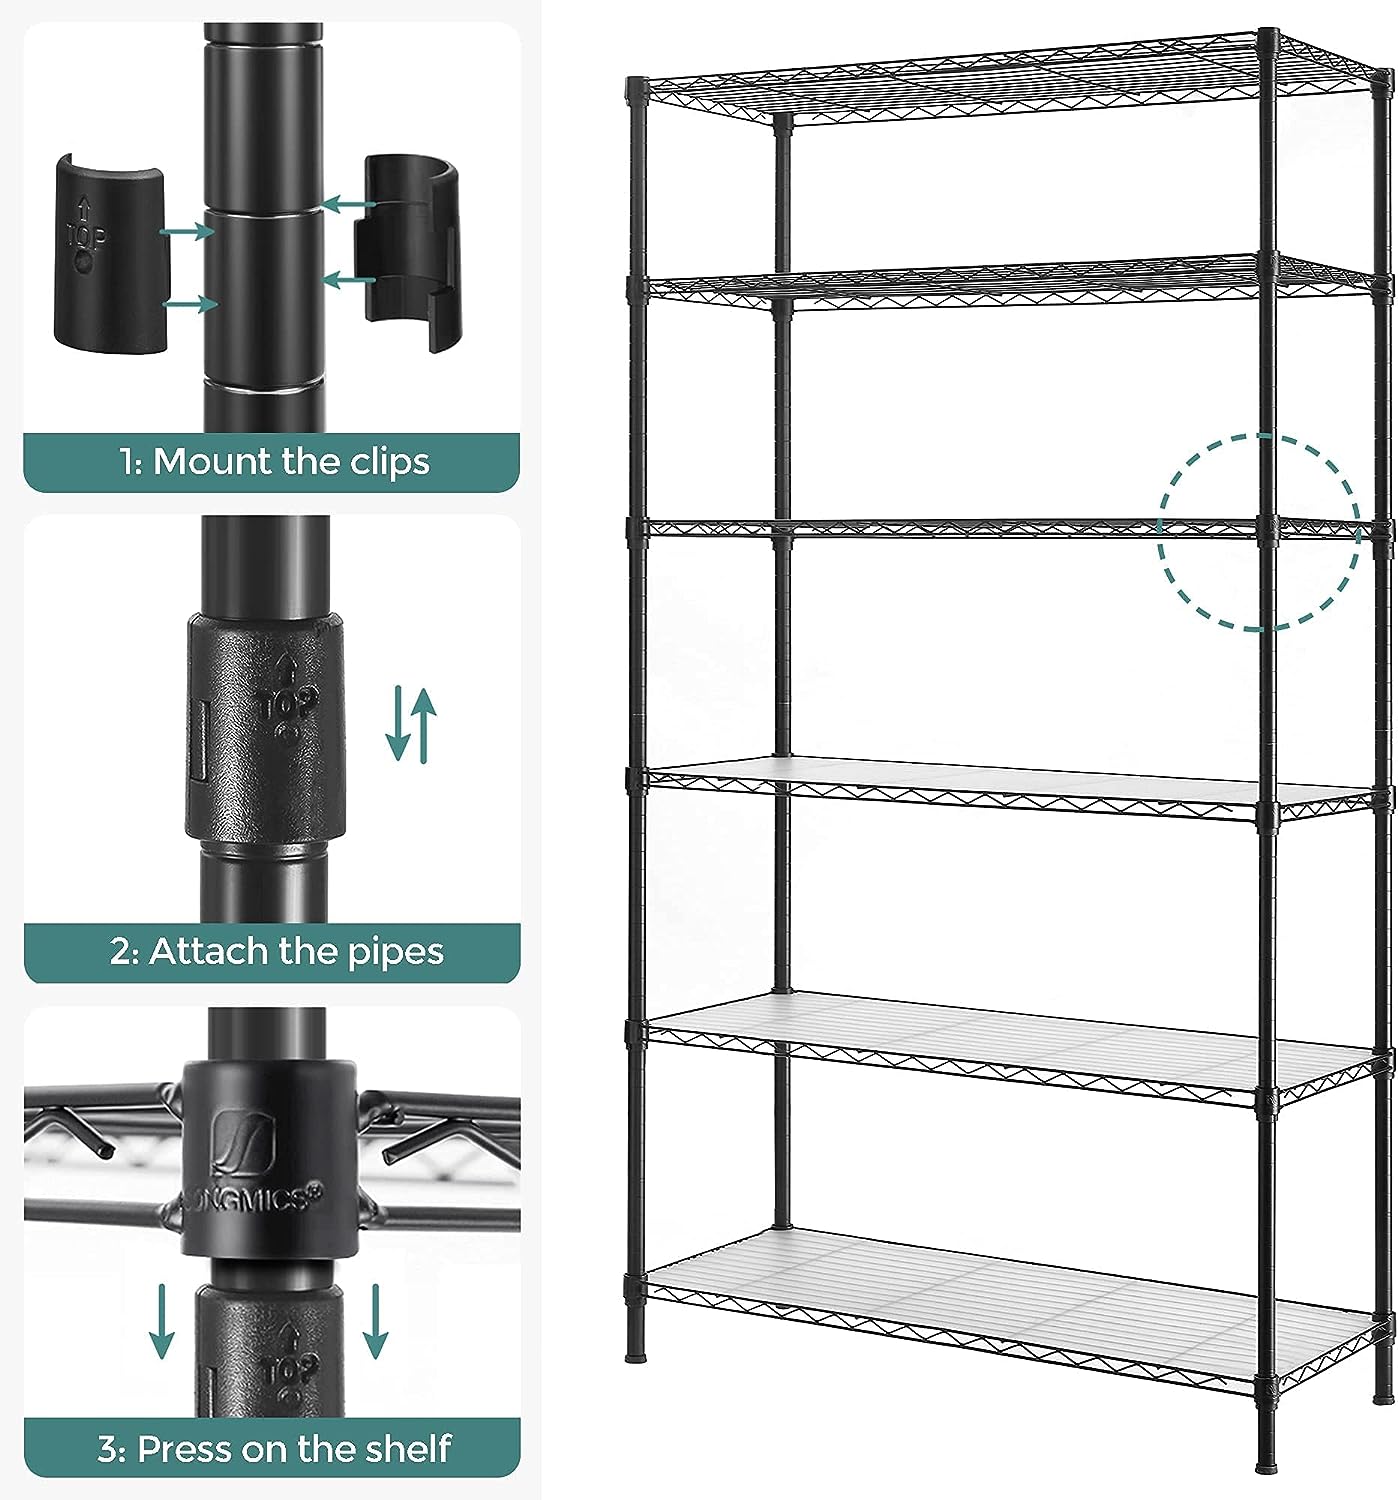 Shelving Unit with Shelf Liners ,Adjustable, Steel Wire Shelves